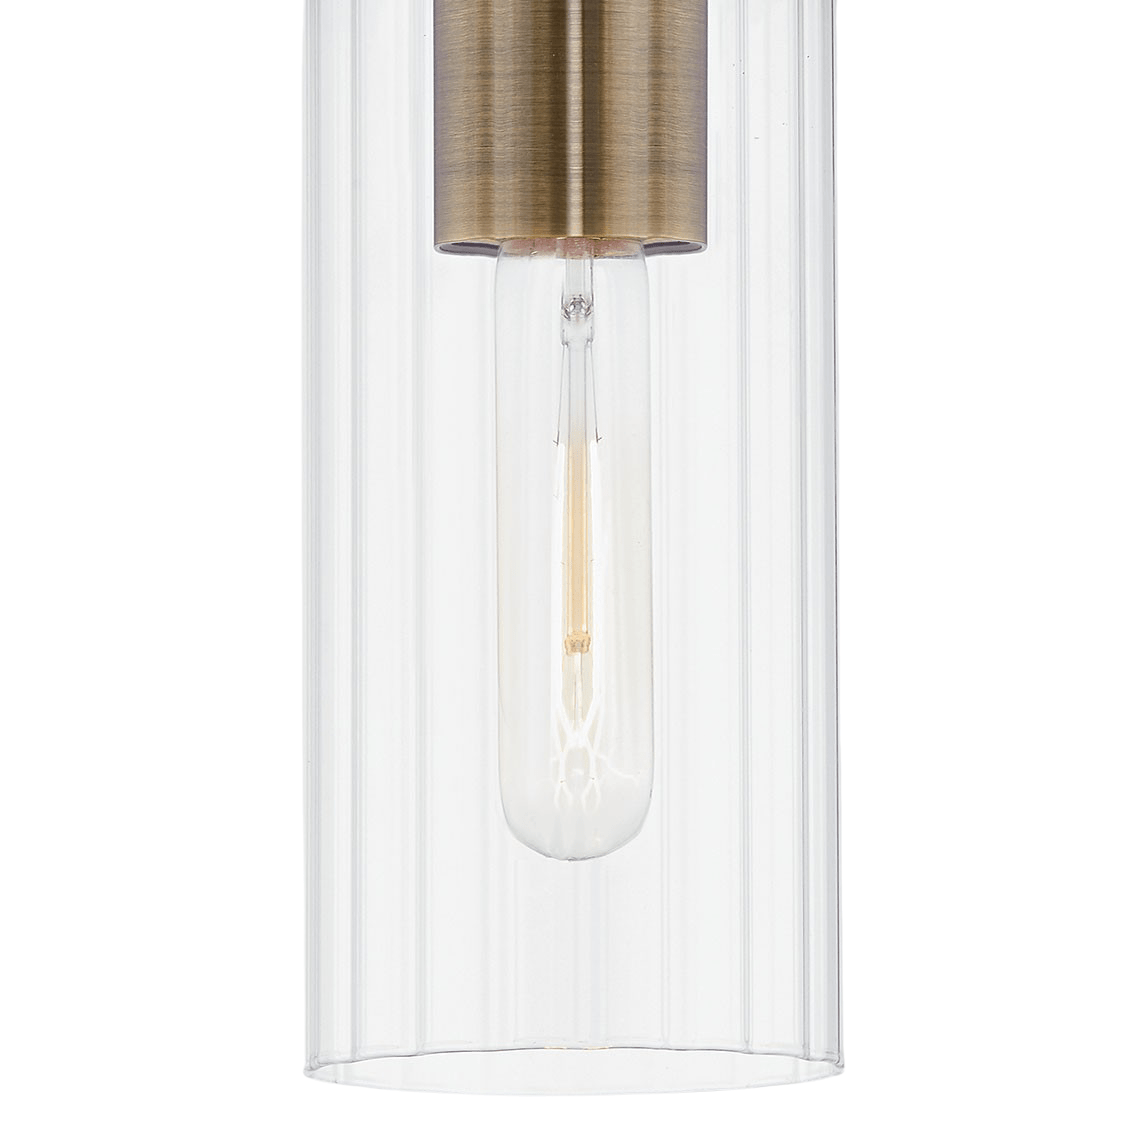 Troy Lighting Yucca Outdoor Wall Sconce Lighting